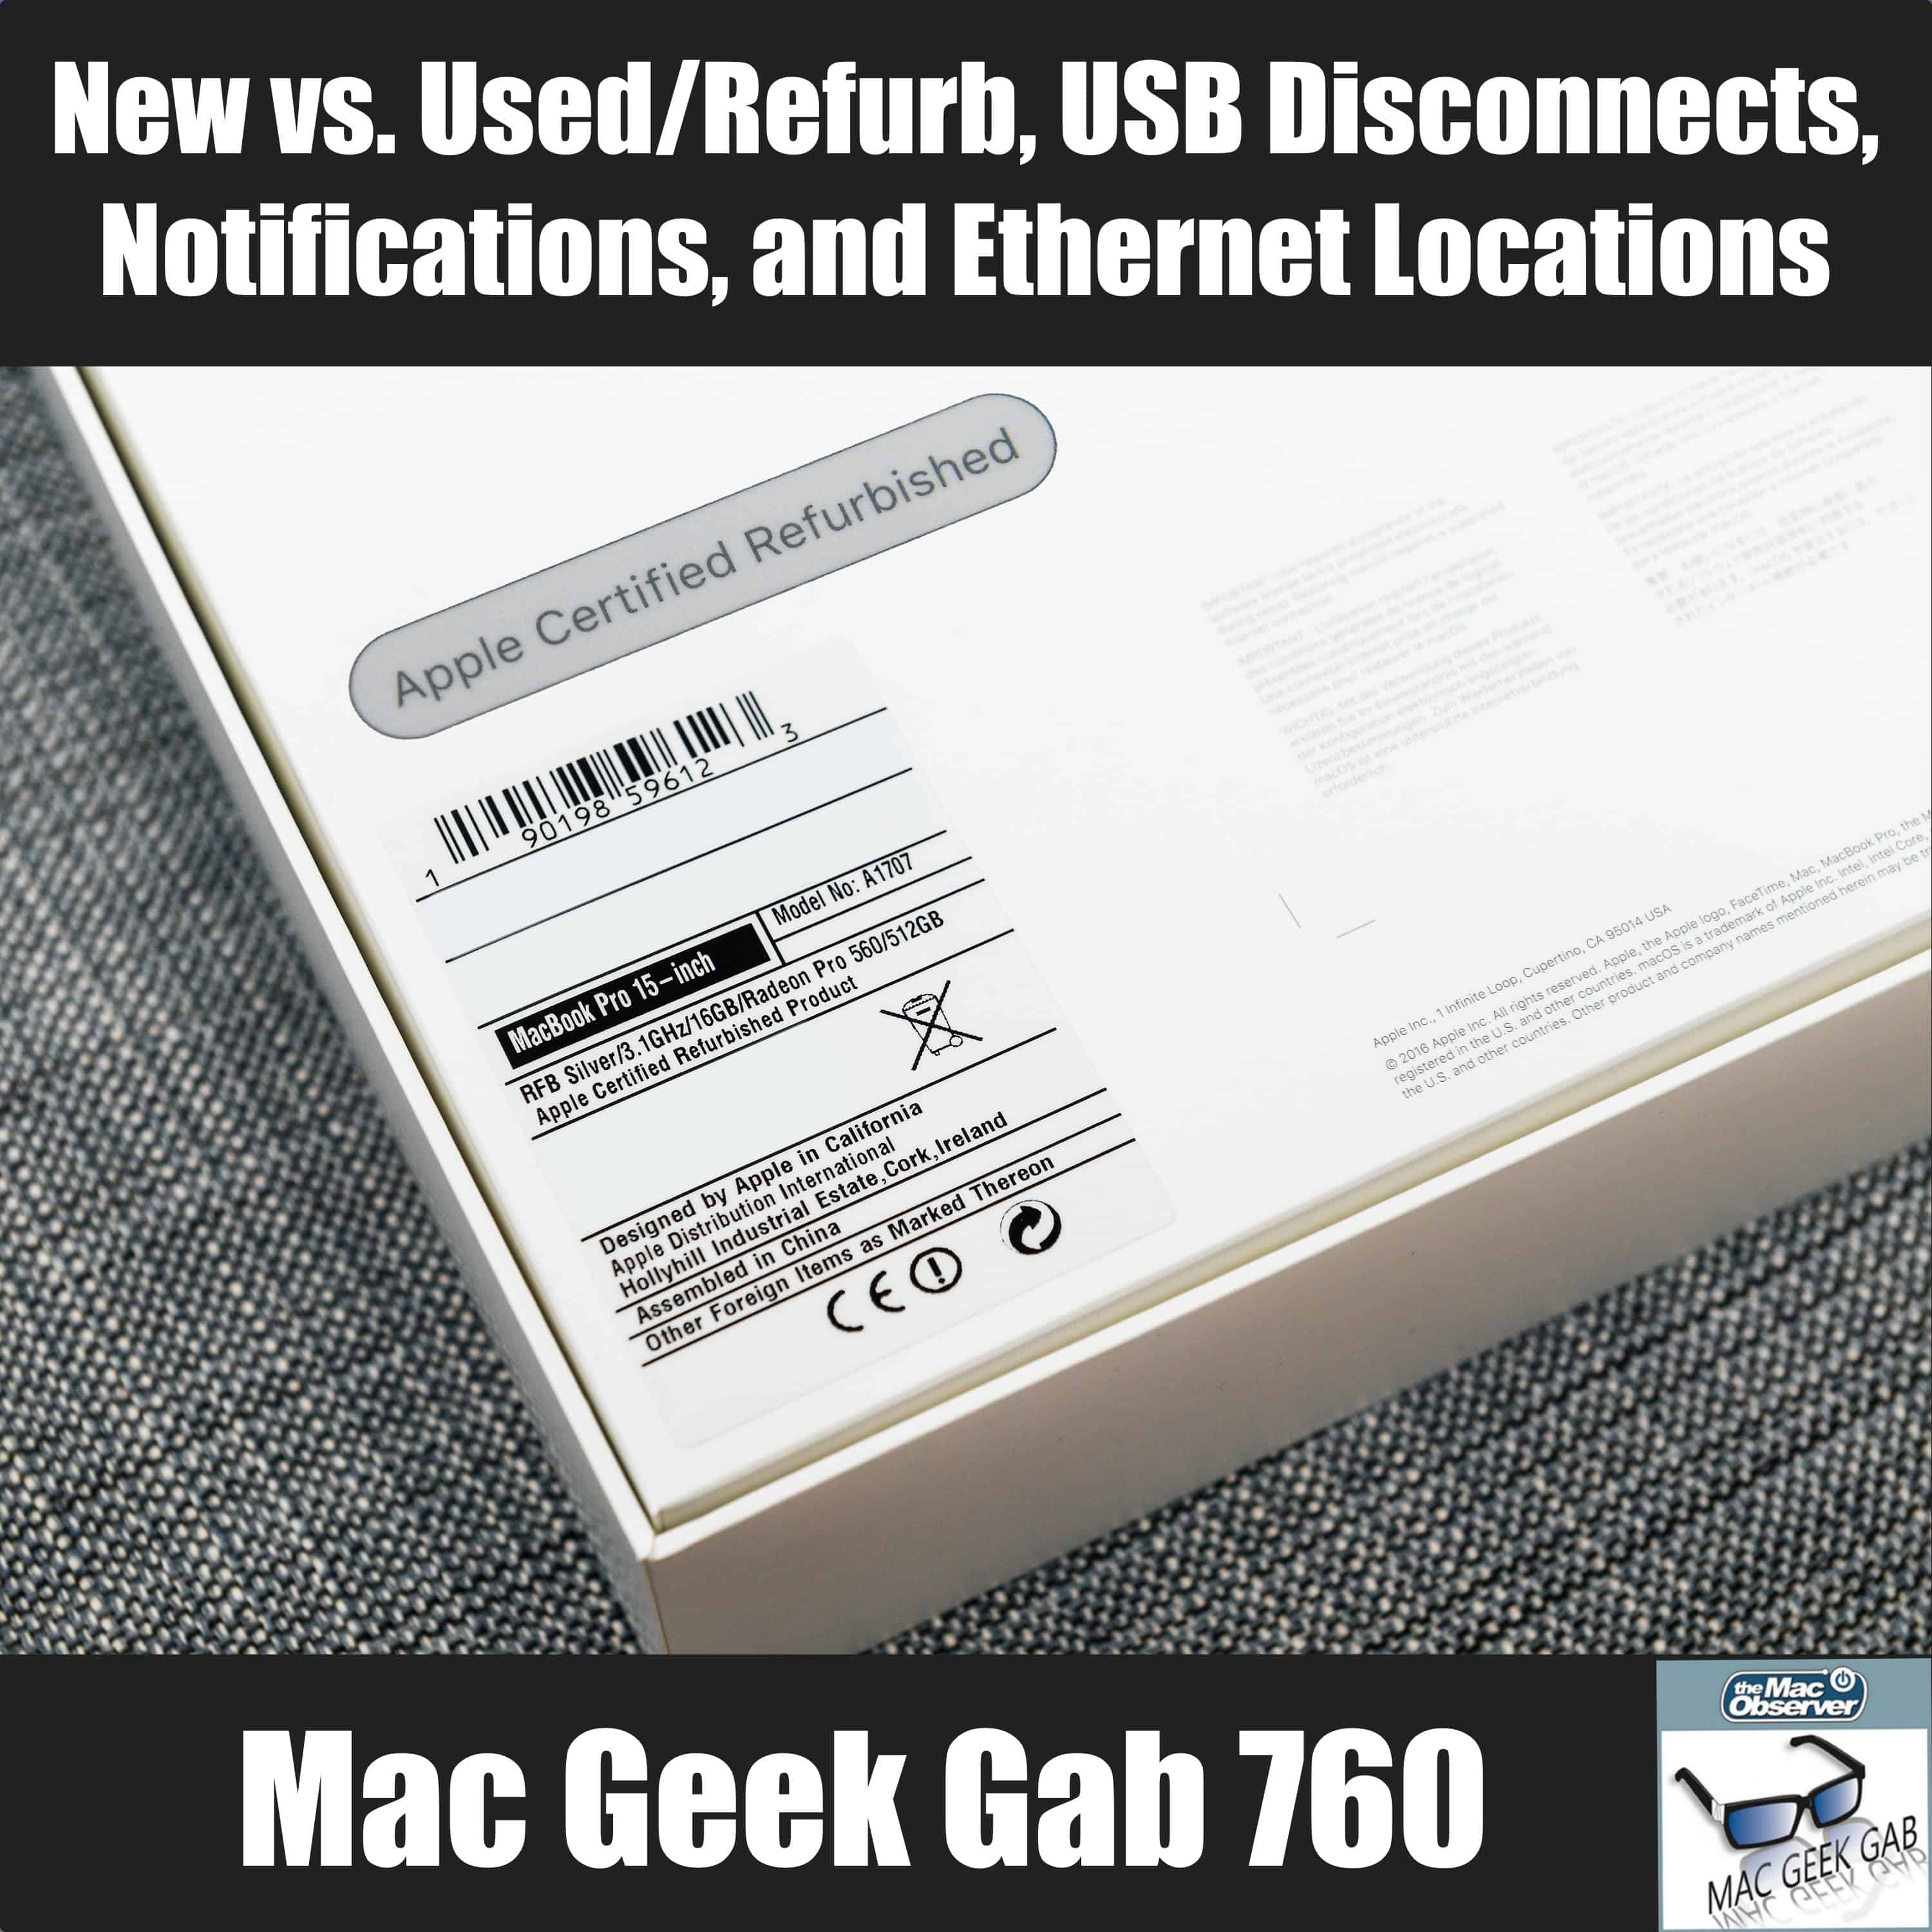 New vs. Used/Refurb, USB Disconnects, Notifications, and Ethernet Locations – Mac Geek Gab 760